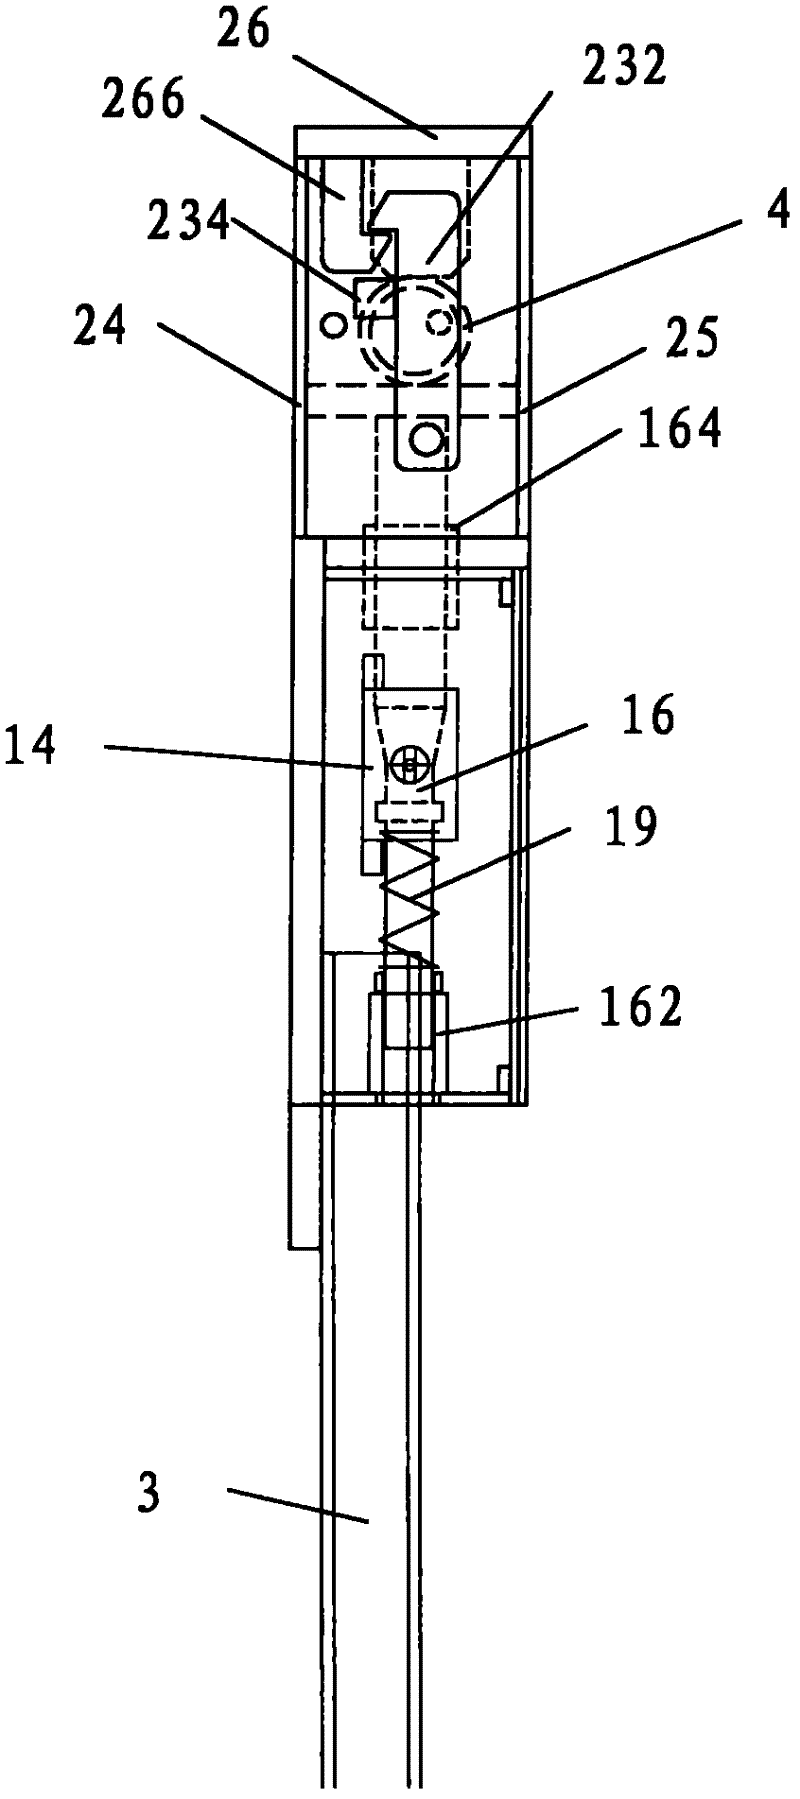 Positioning monitoring and managing system for mobile derailer